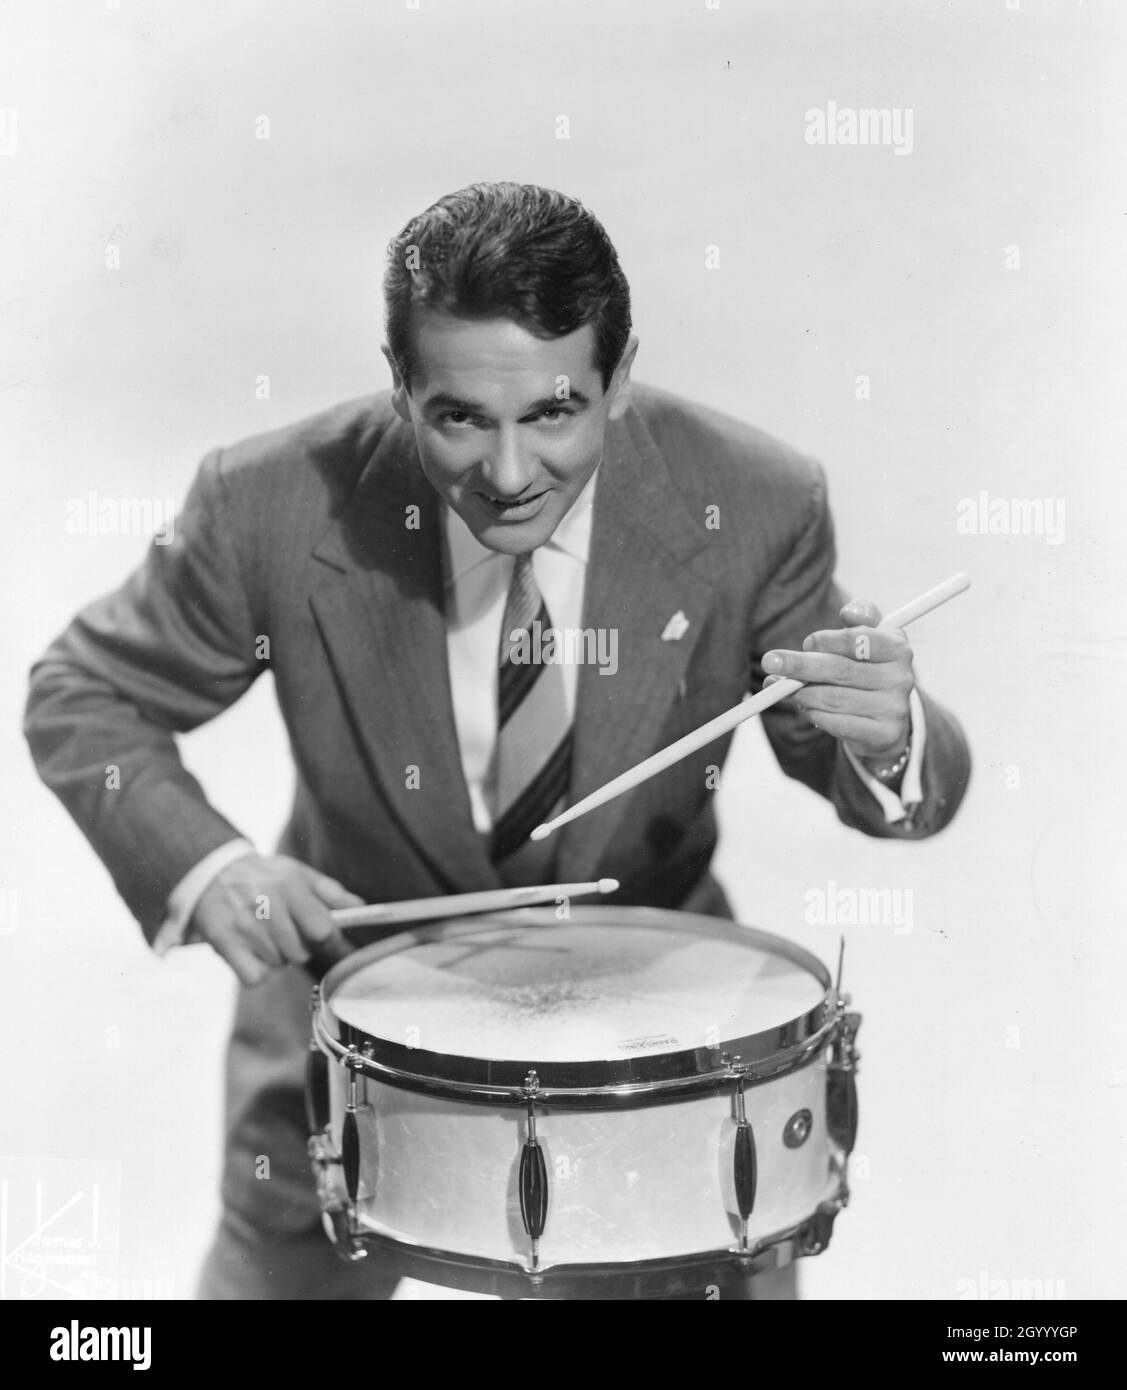 Gene Krupa, jazz drummer, who directed his own quintet at the 1959 Newport Jazz Festival. 1959. Stock Photo